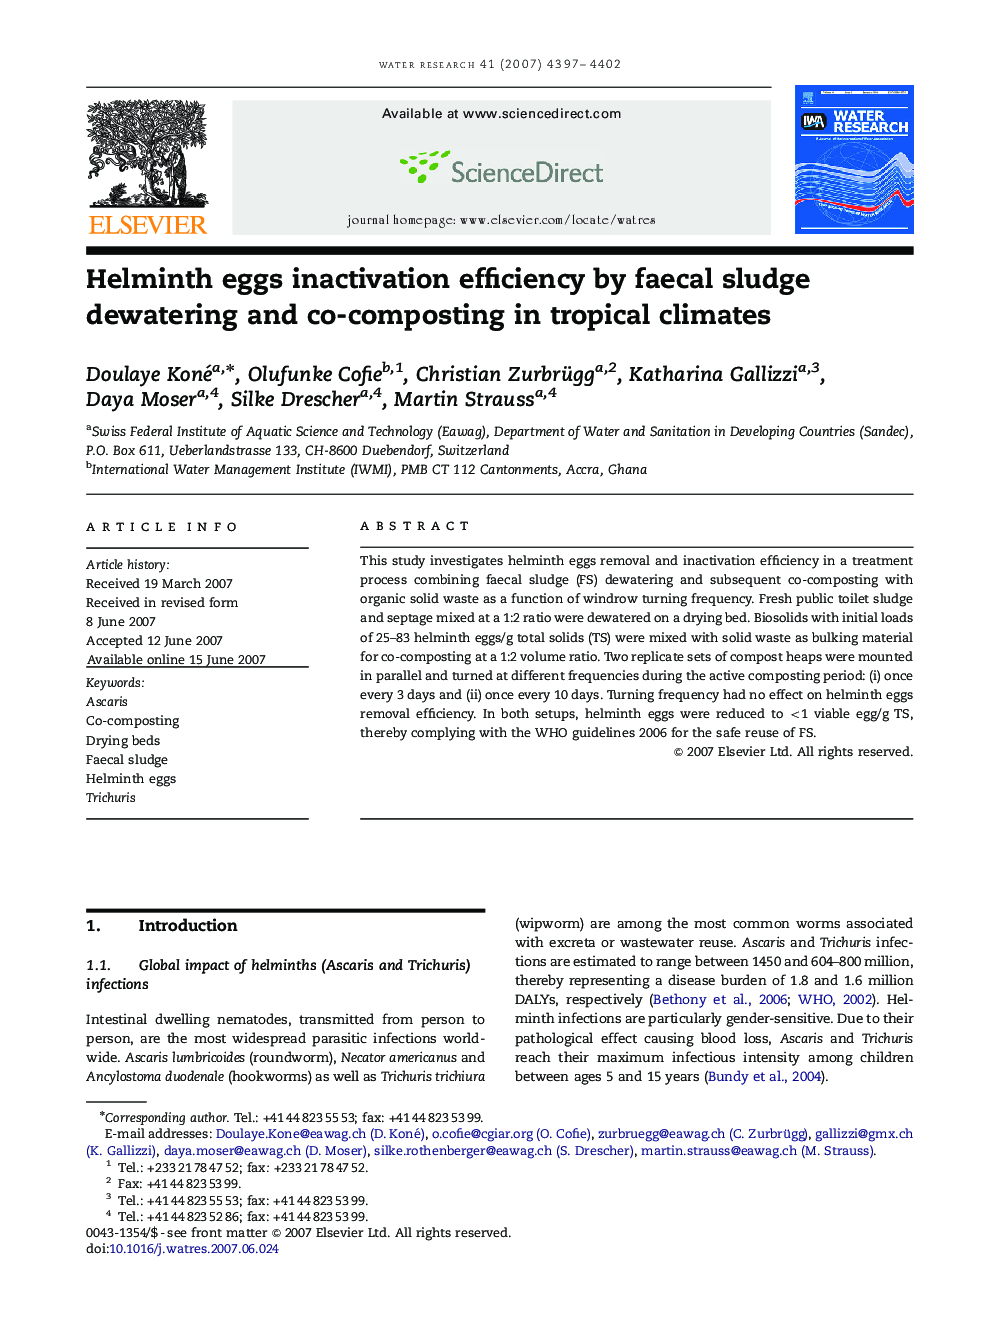 Helminth eggs inactivation efficiency by faecal sludge dewatering and co-composting in tropical climates